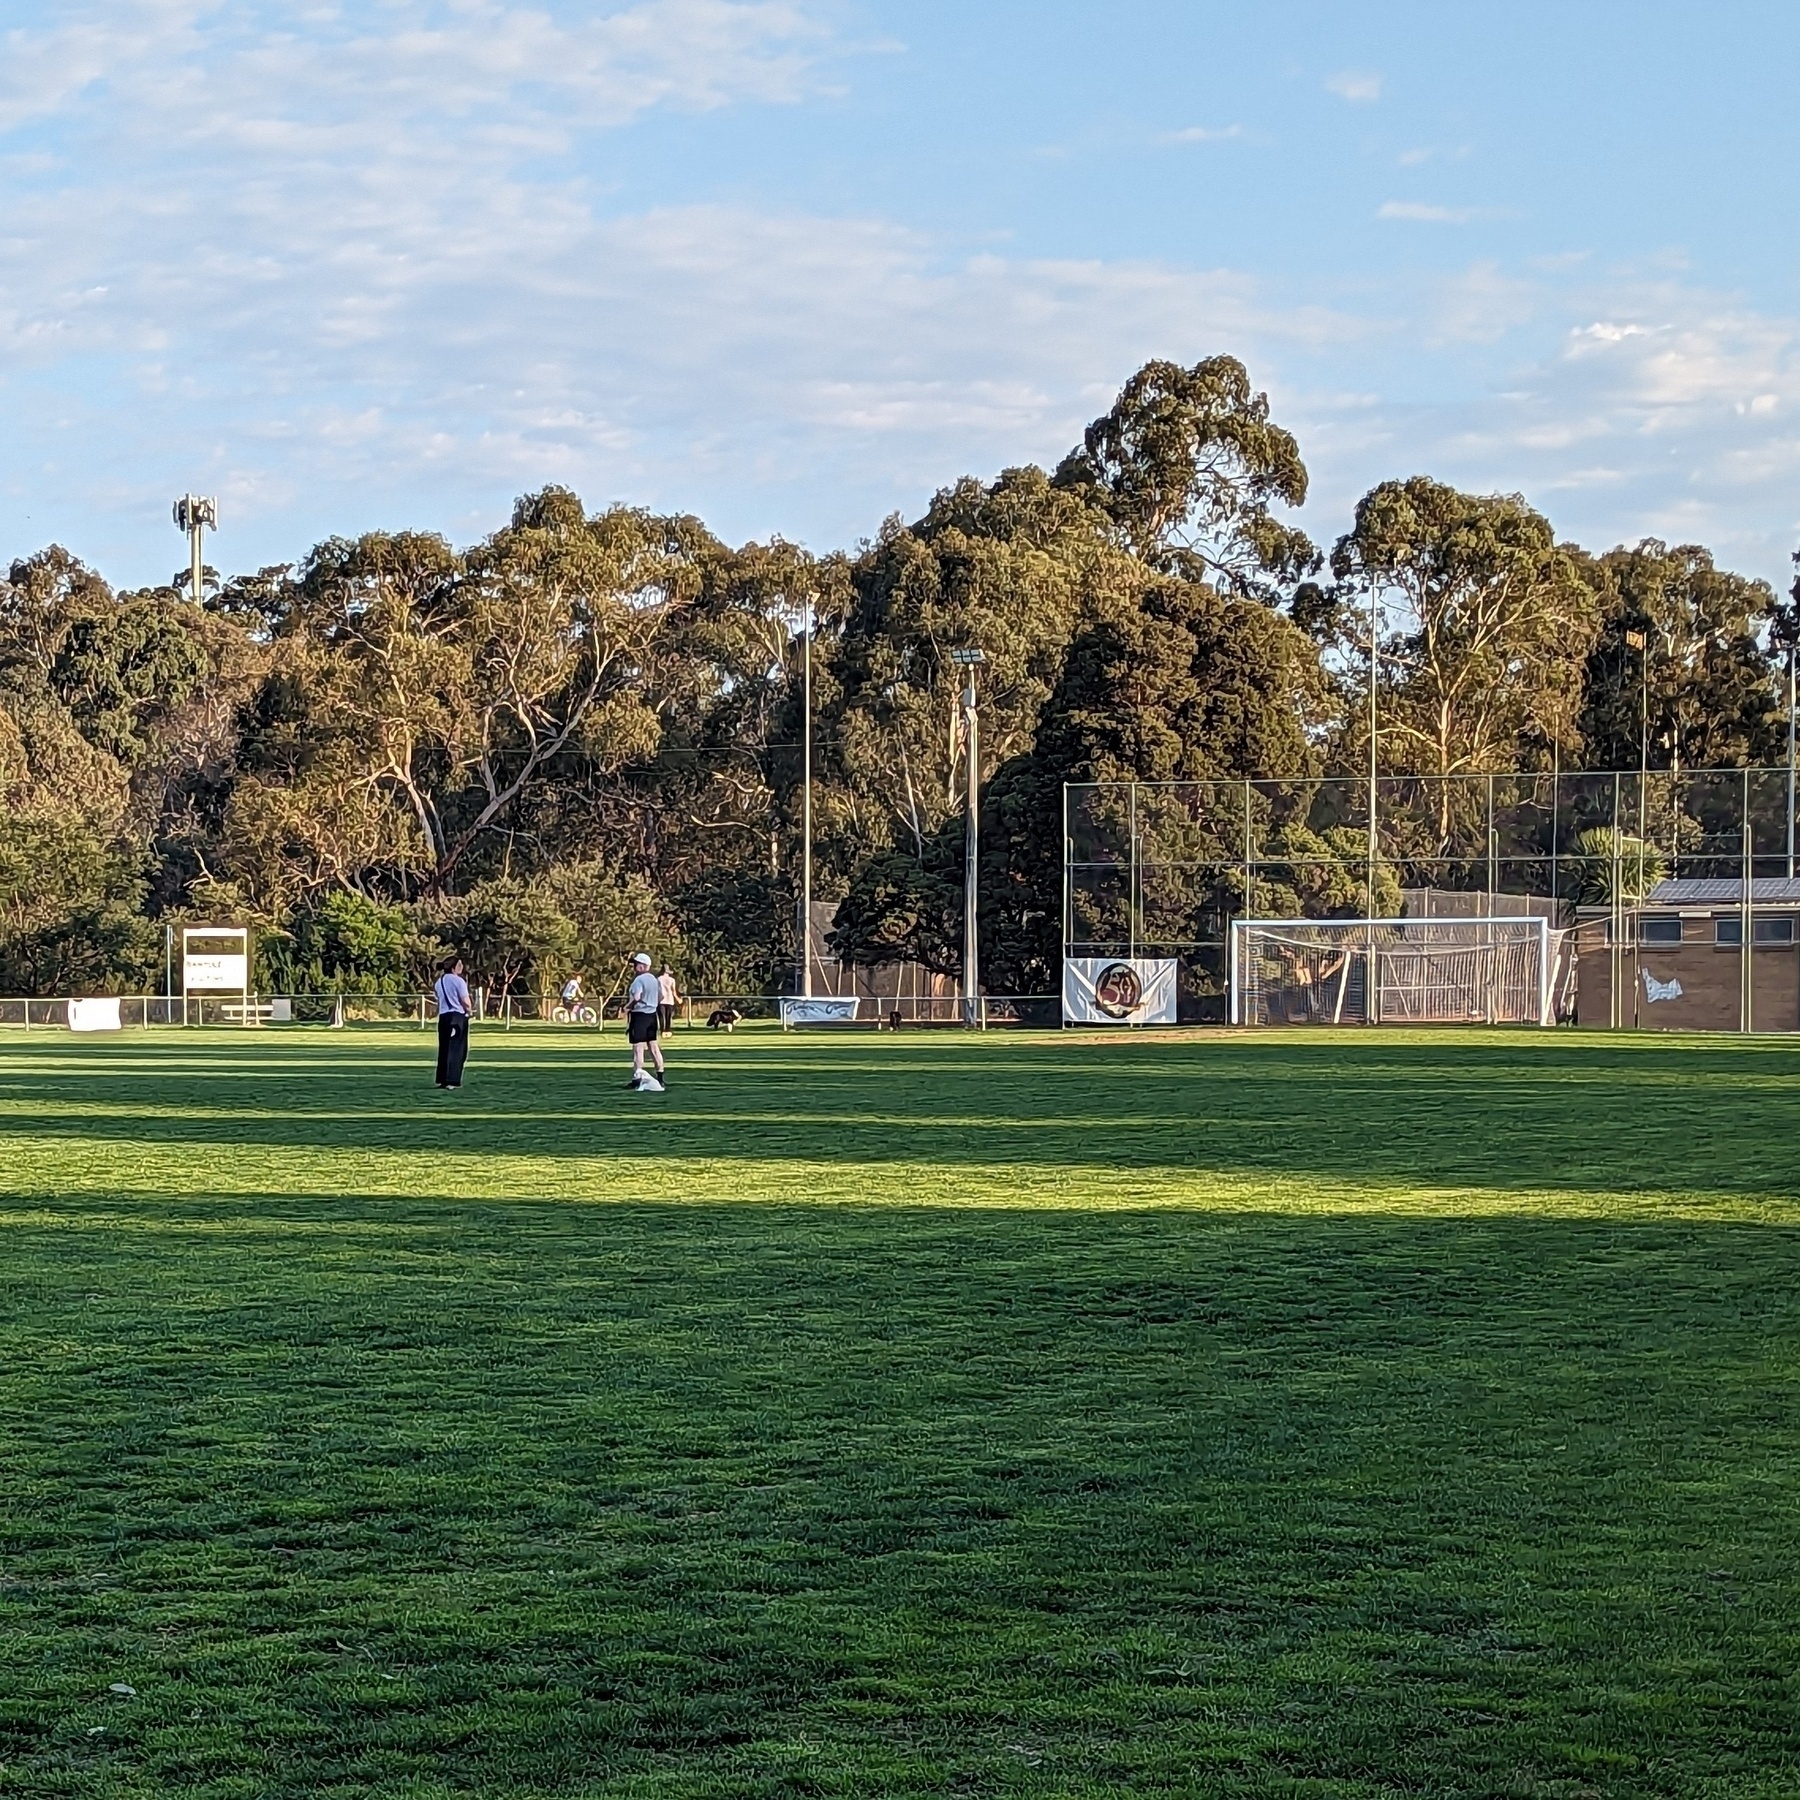 An empty soccer pitch with a couple of people playing with their dogs